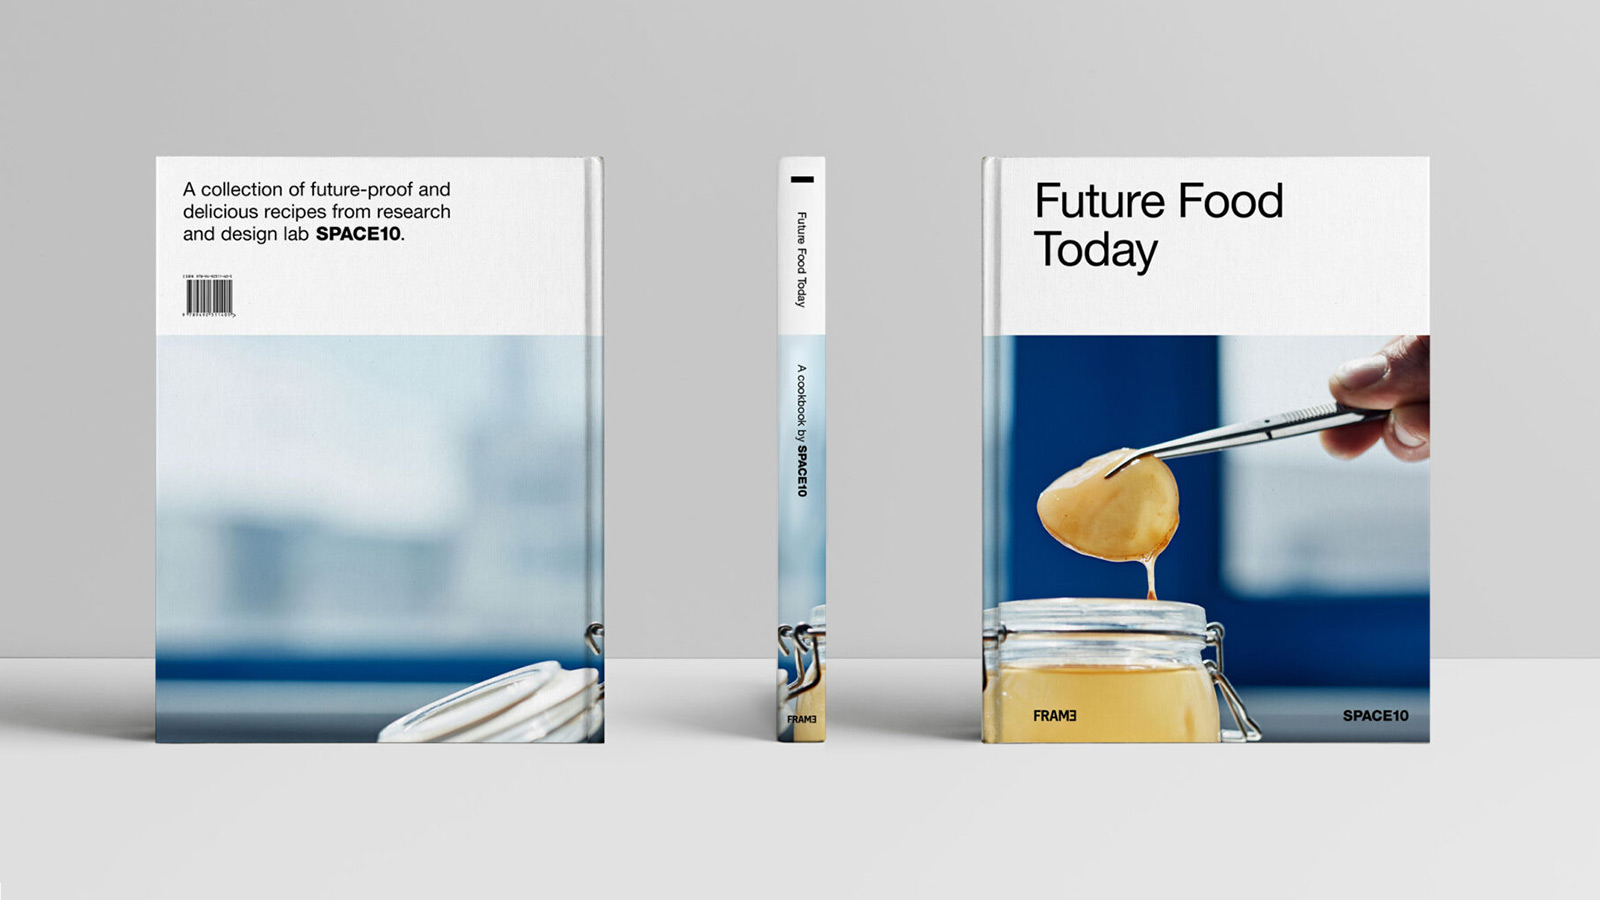 ‘Future Food Today’ by SPACE10